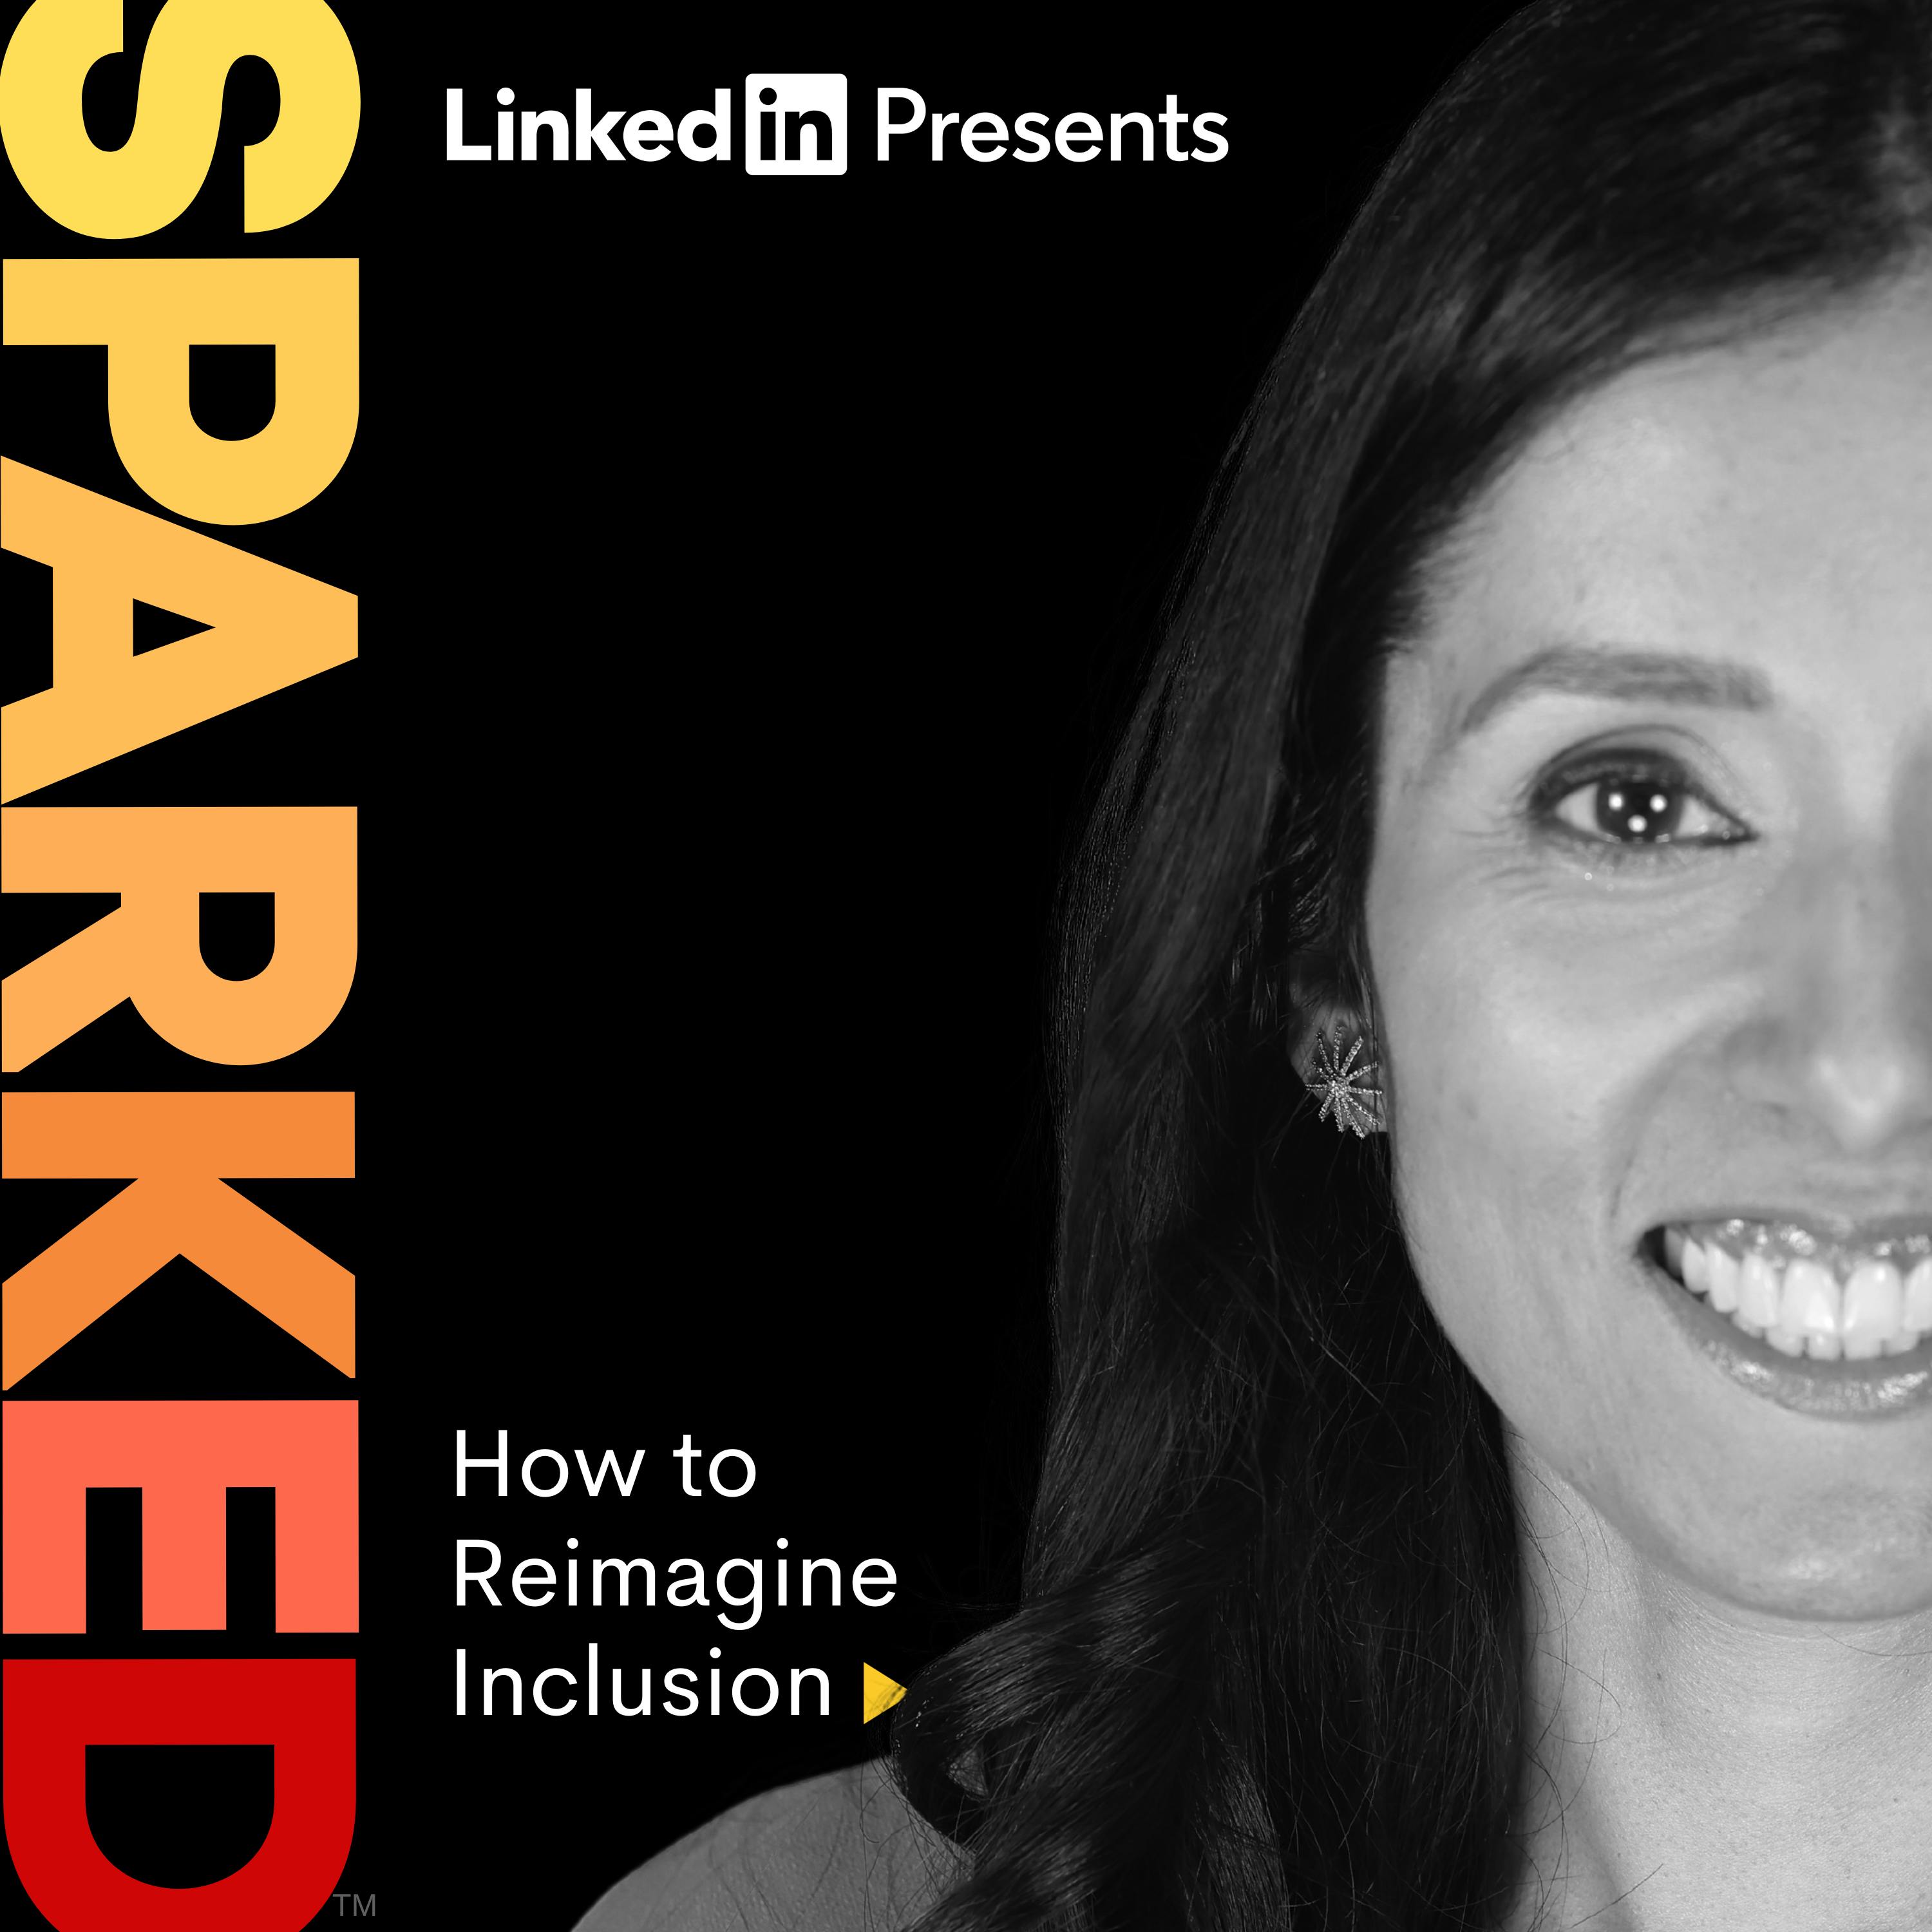 How to Reimagine Inclusion